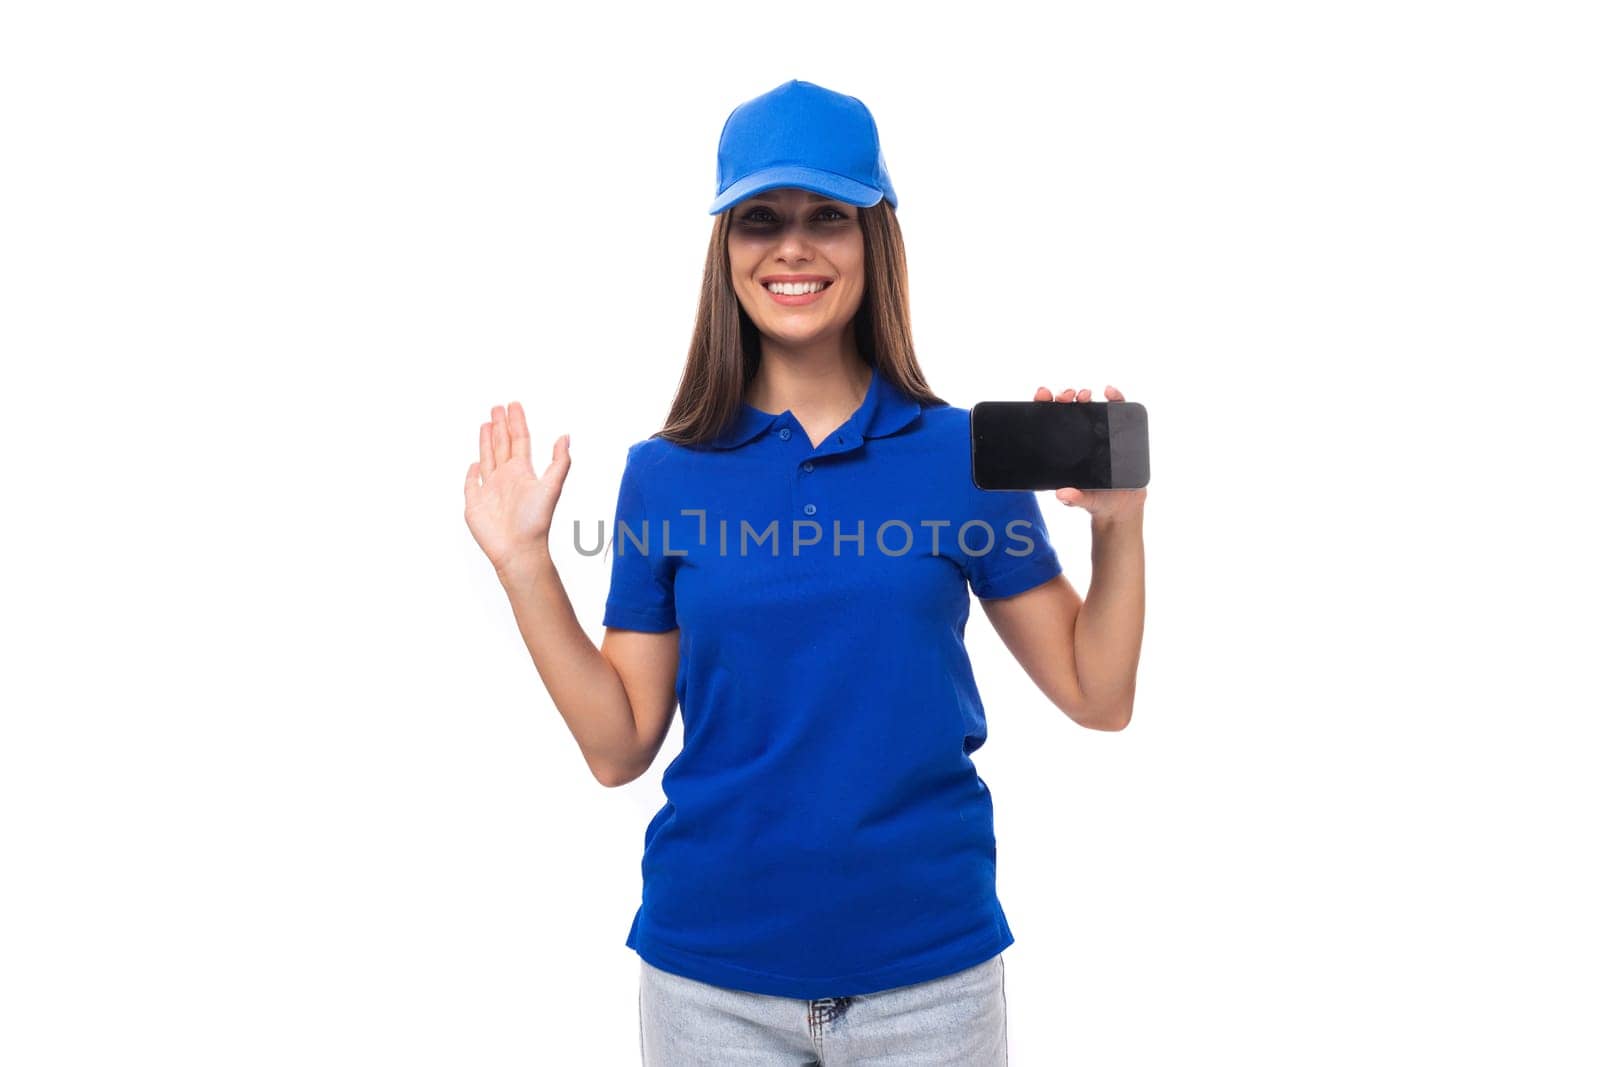 slender young brunette woman in a blue cap and t-shirt shows ads on a smartphone.